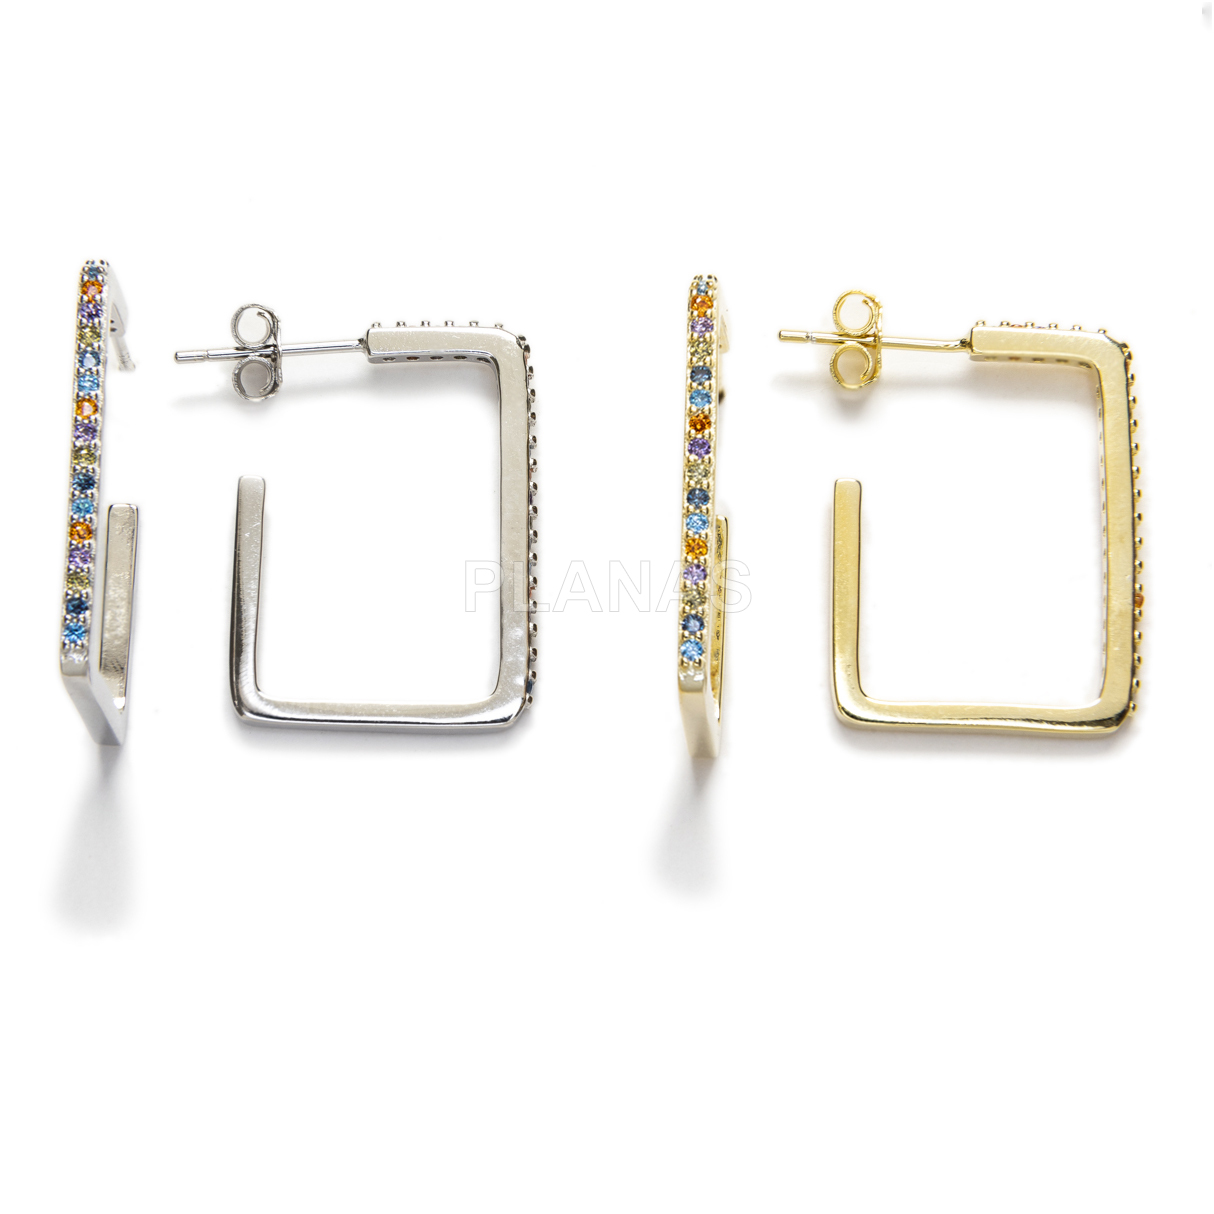 Hoops in rhodium-plated sterling silver and colored zircons.